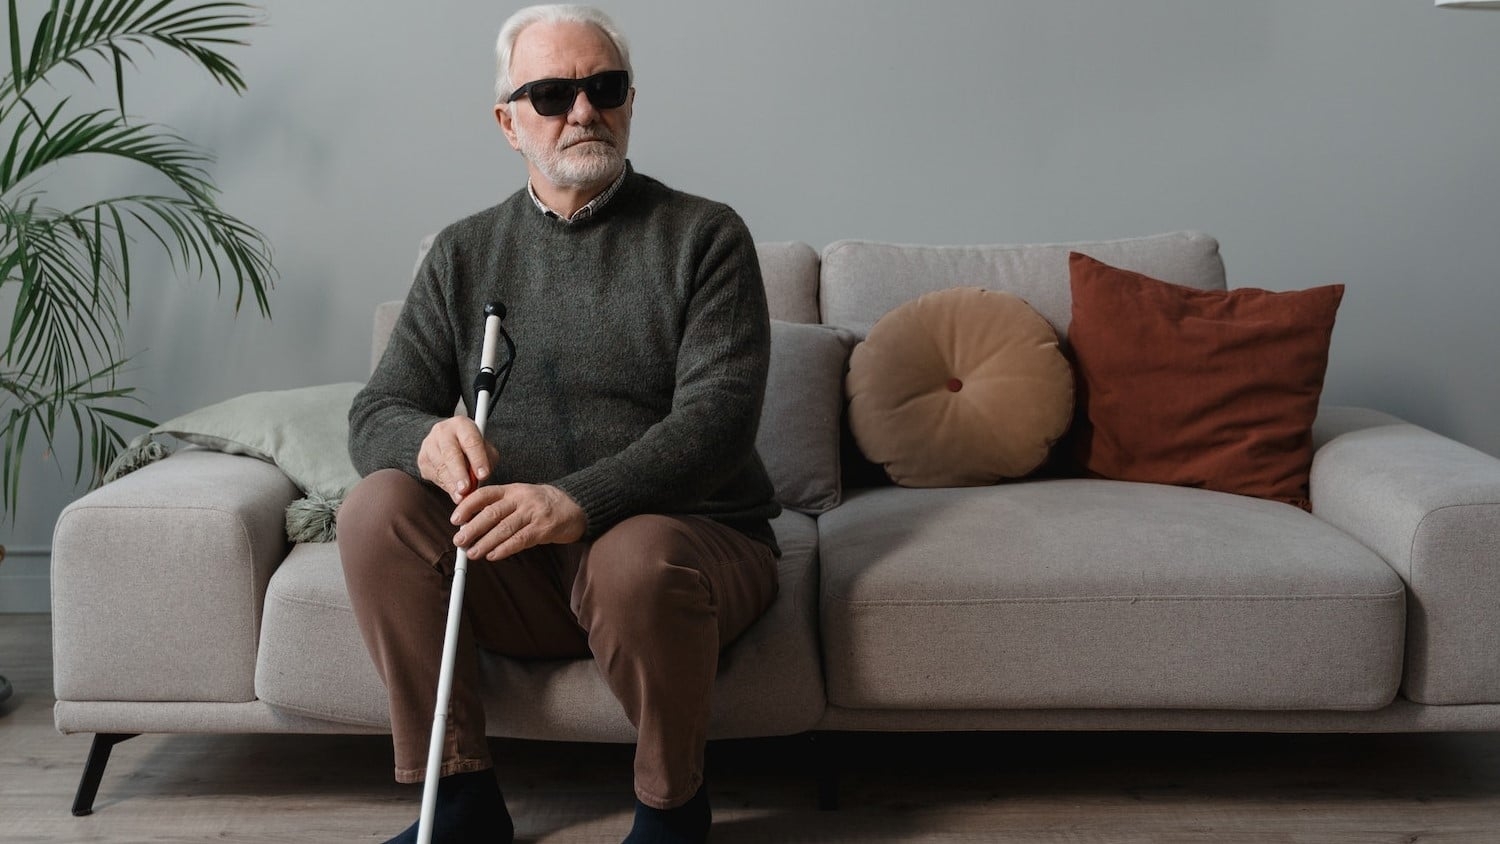 an older white man wearing sunglasses and holding a white cane is seated on a sofa